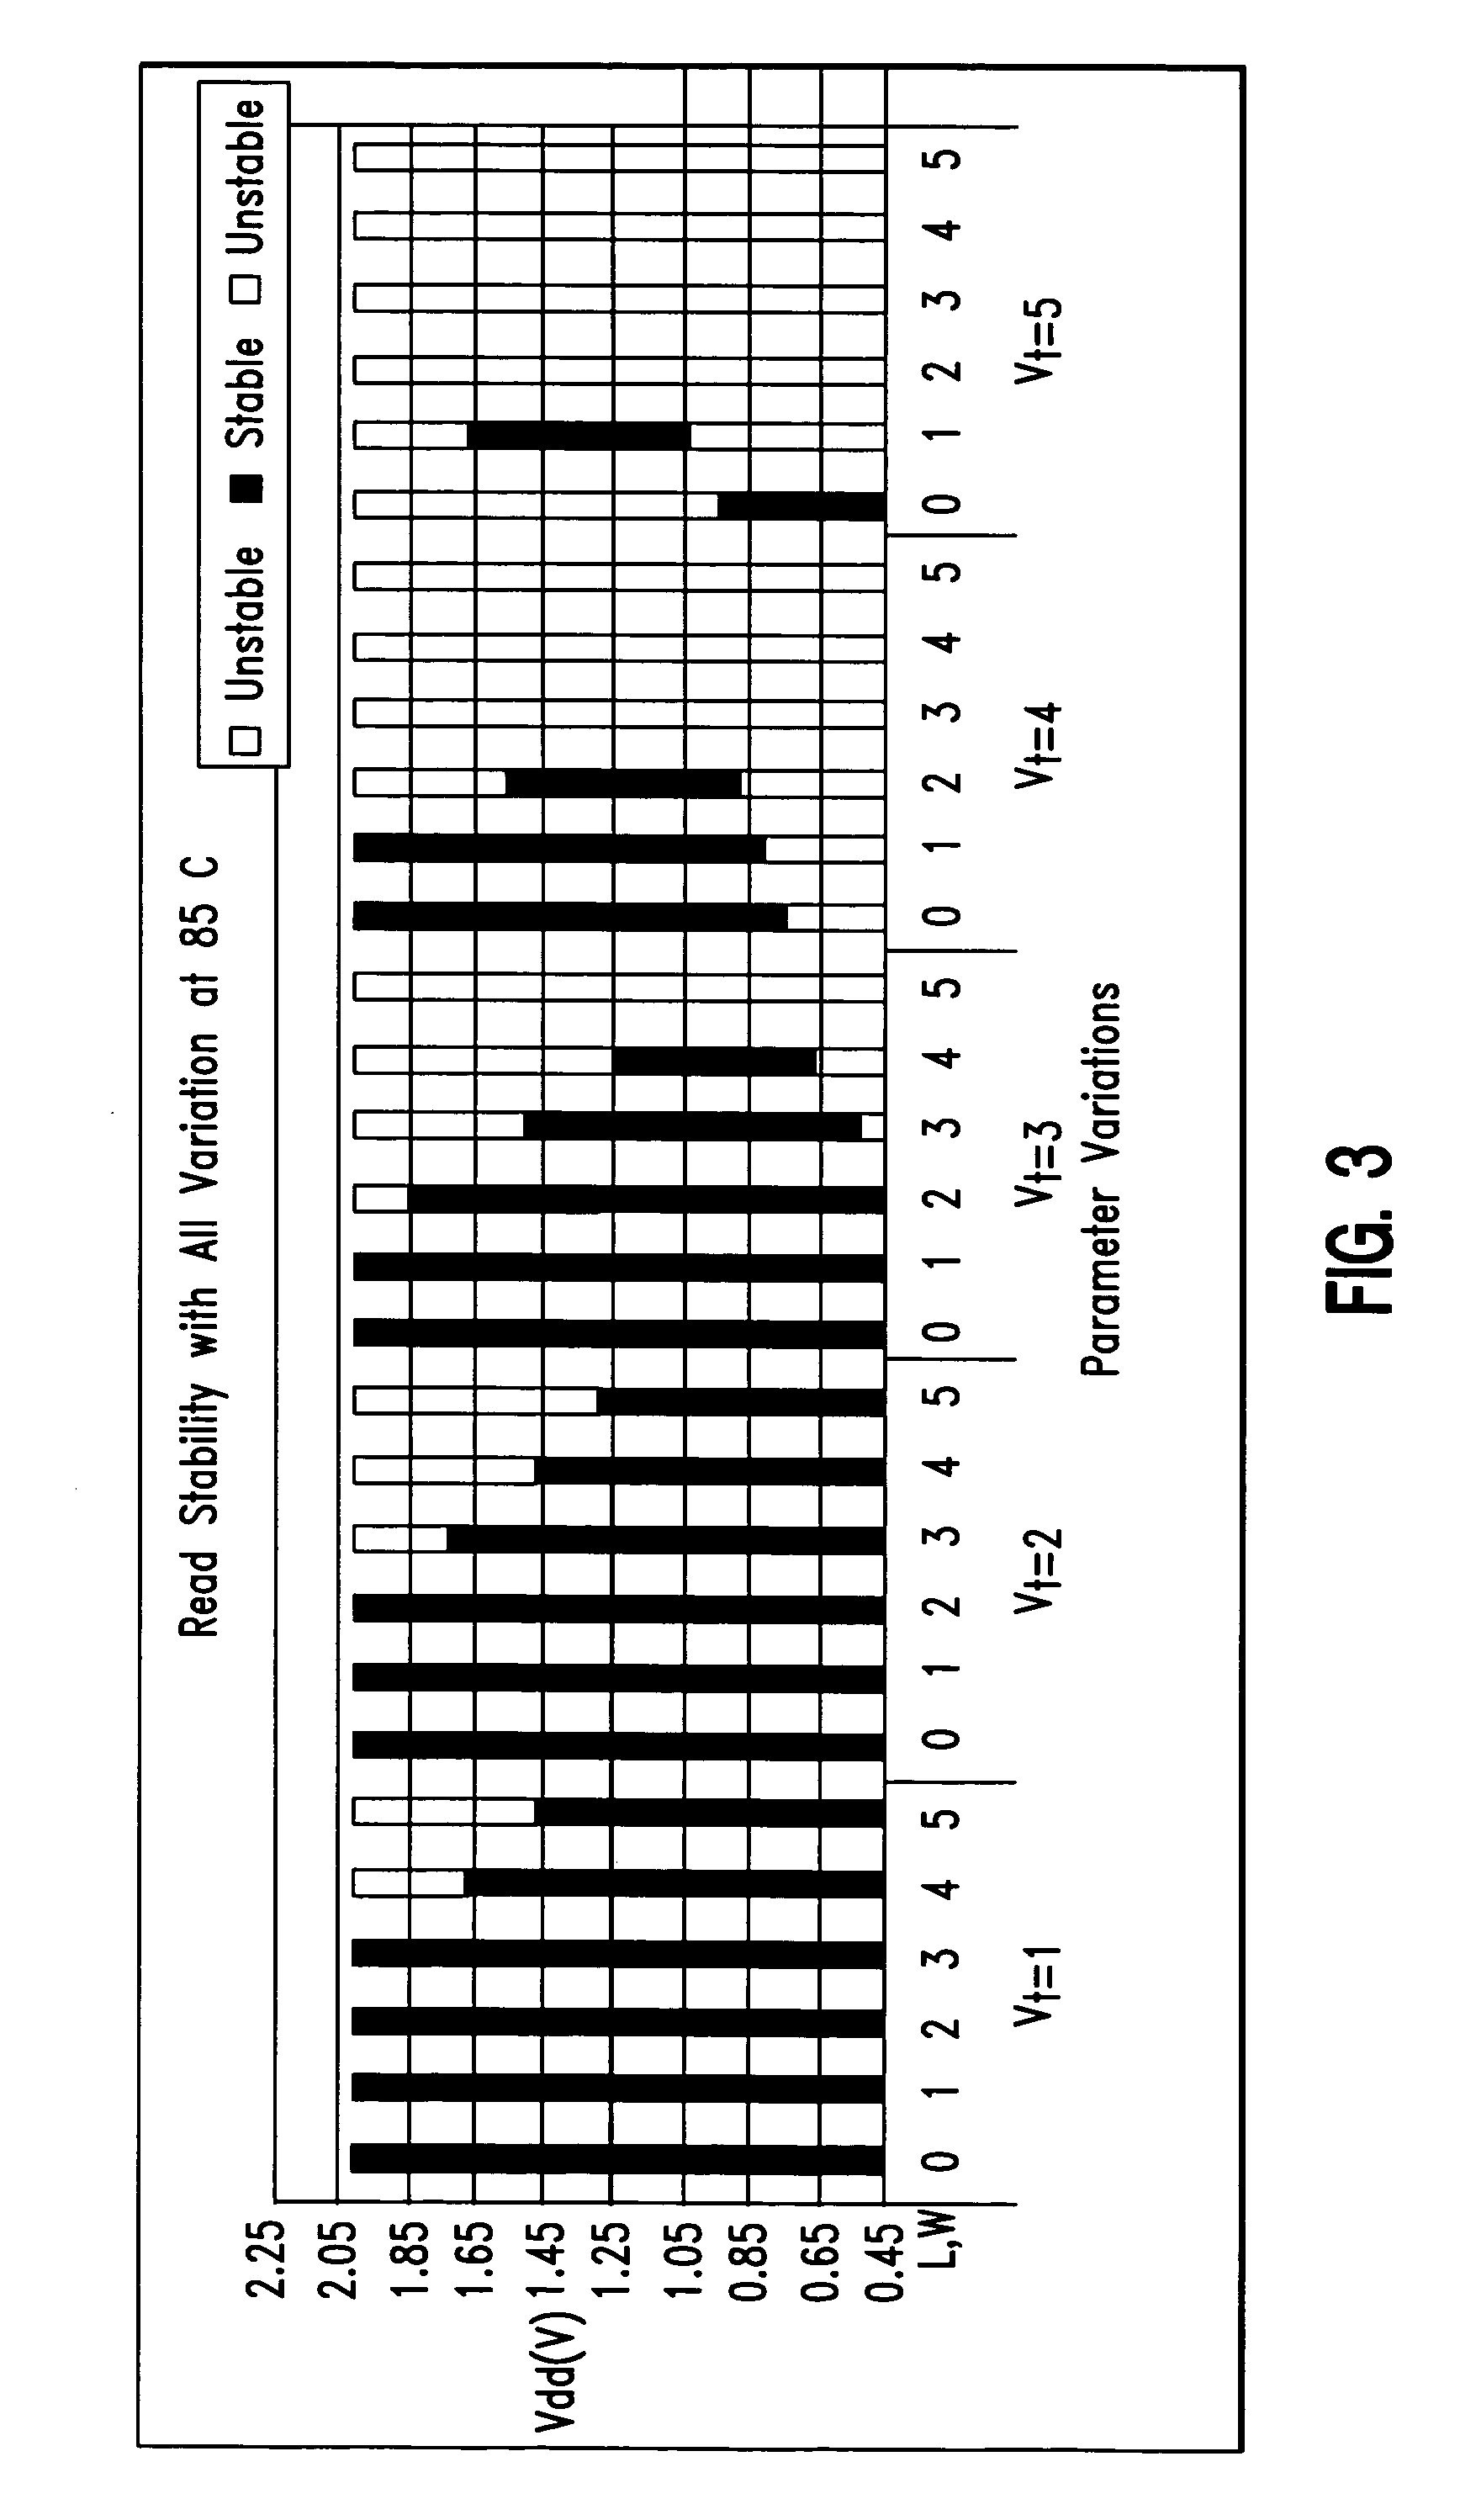 SRAM array with improved cell stability